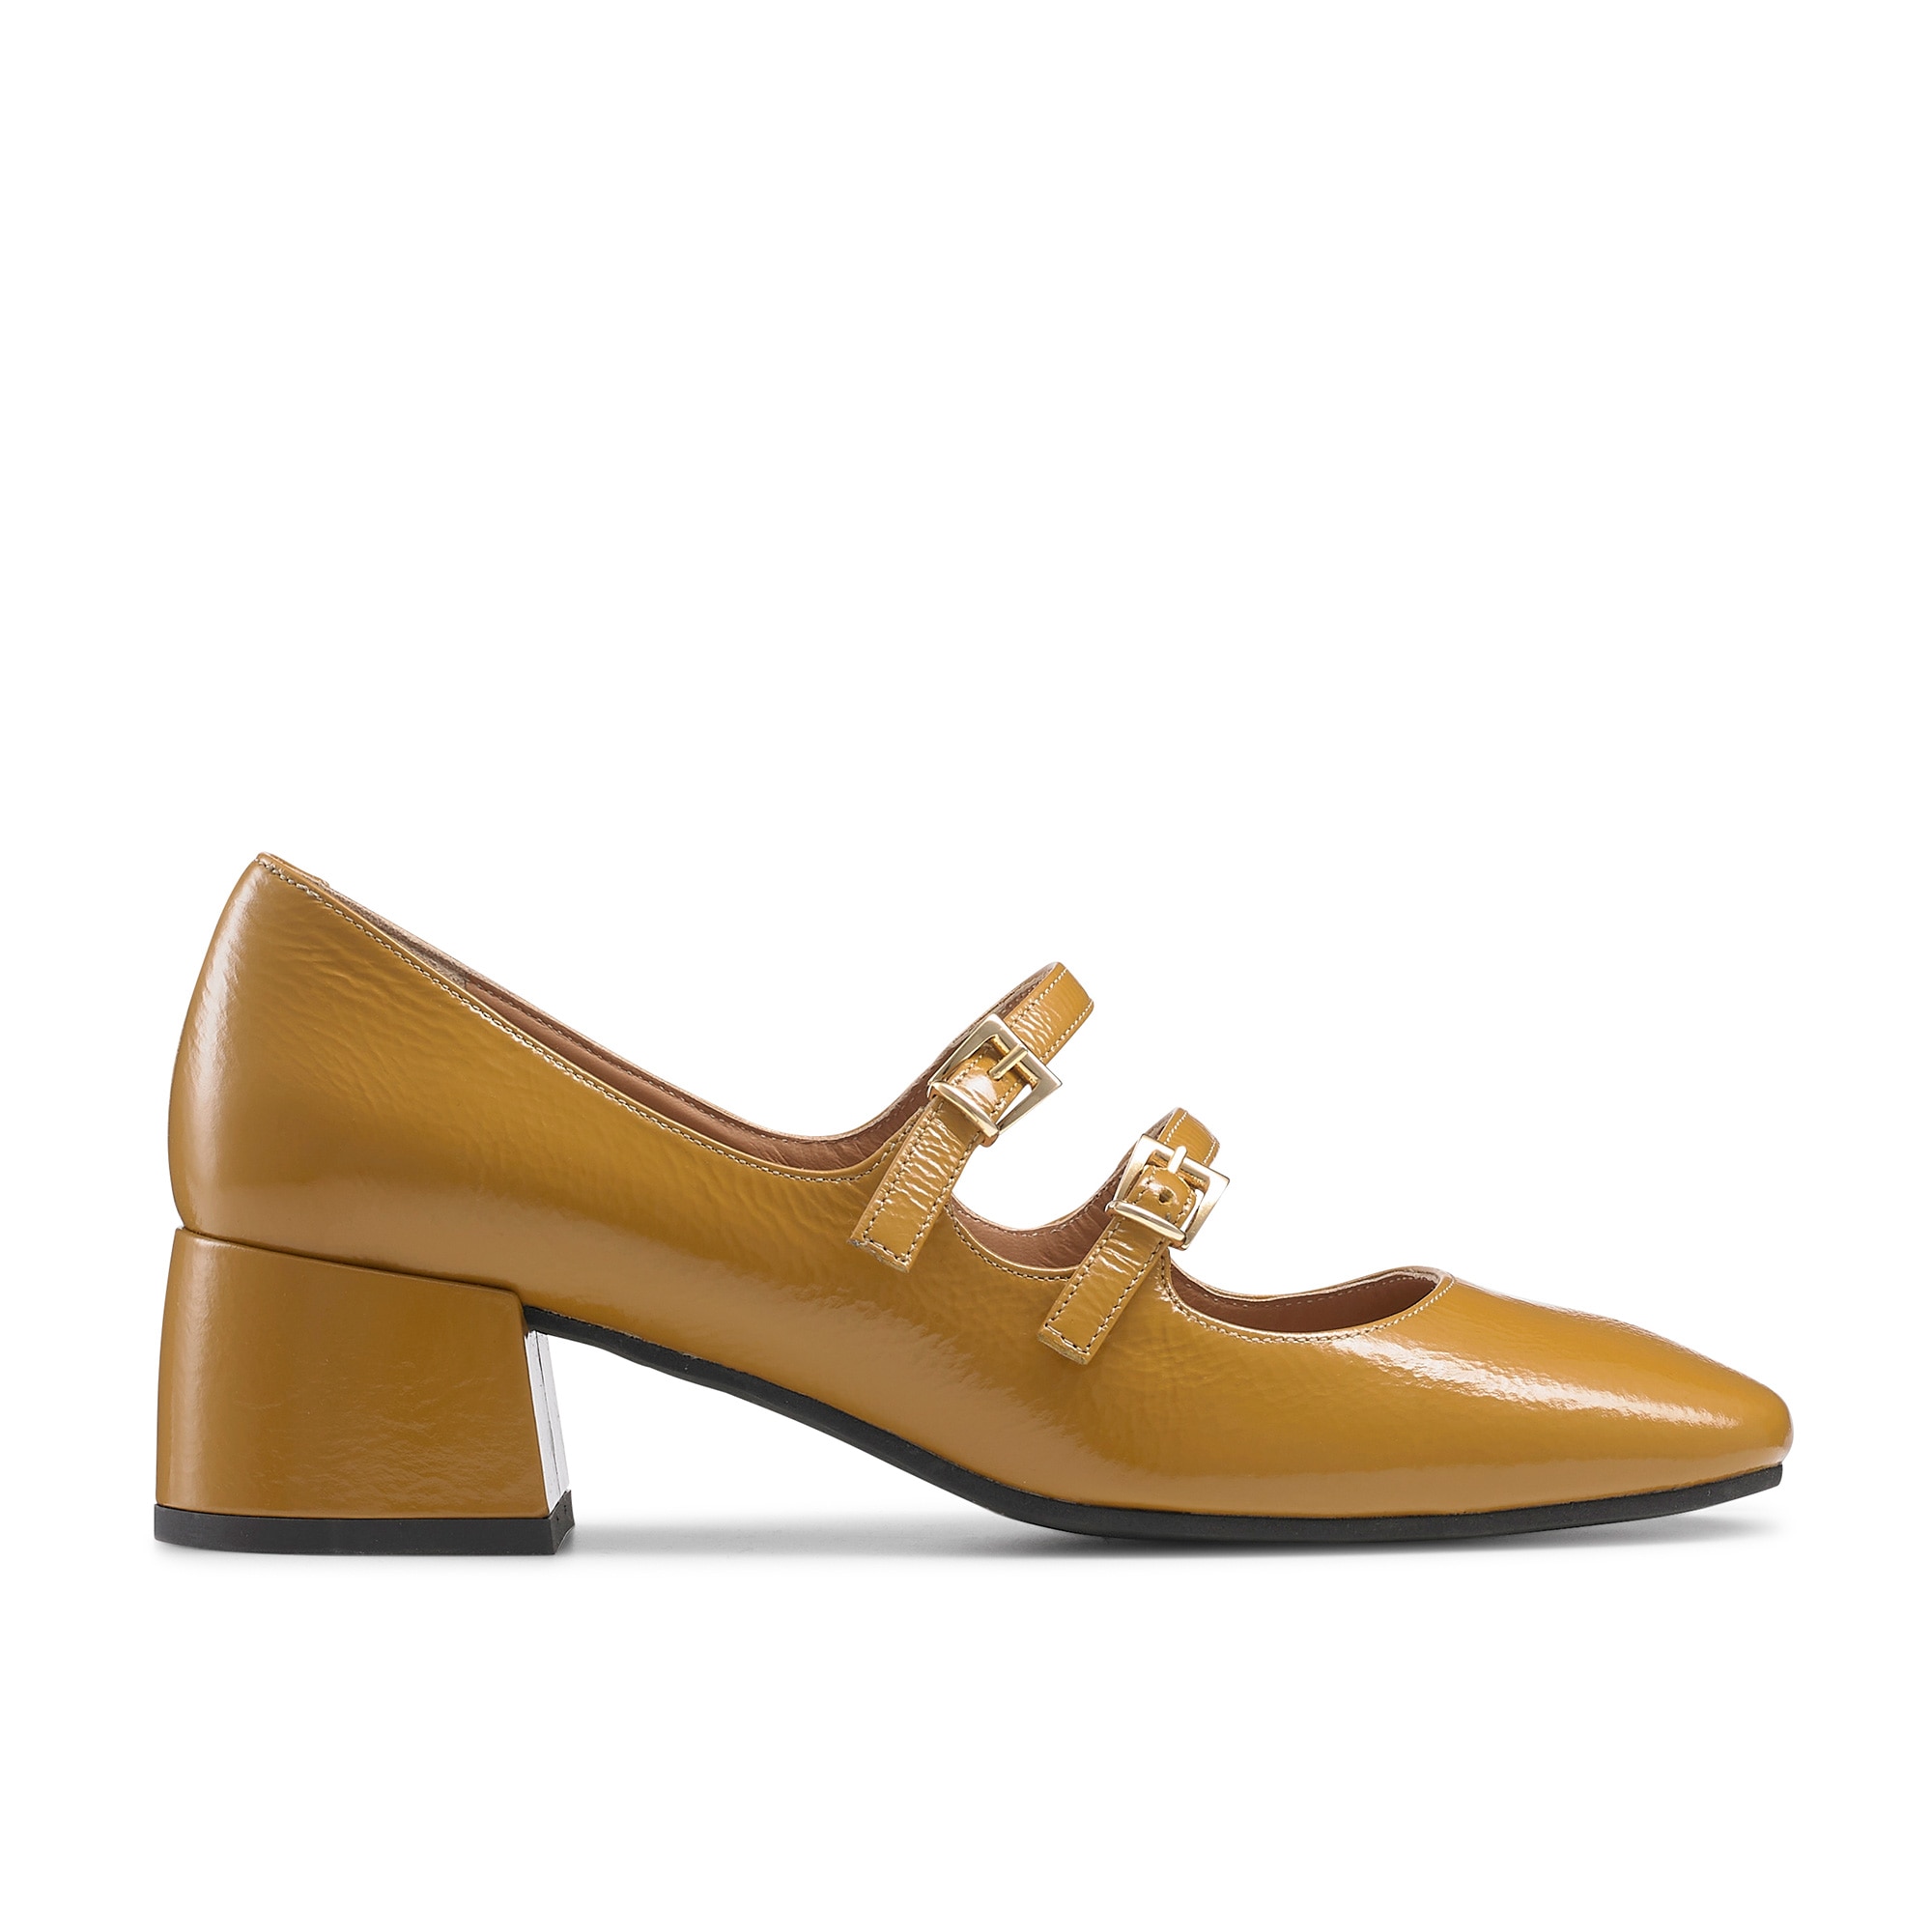 Russell and Bromley Jane heels in mustard